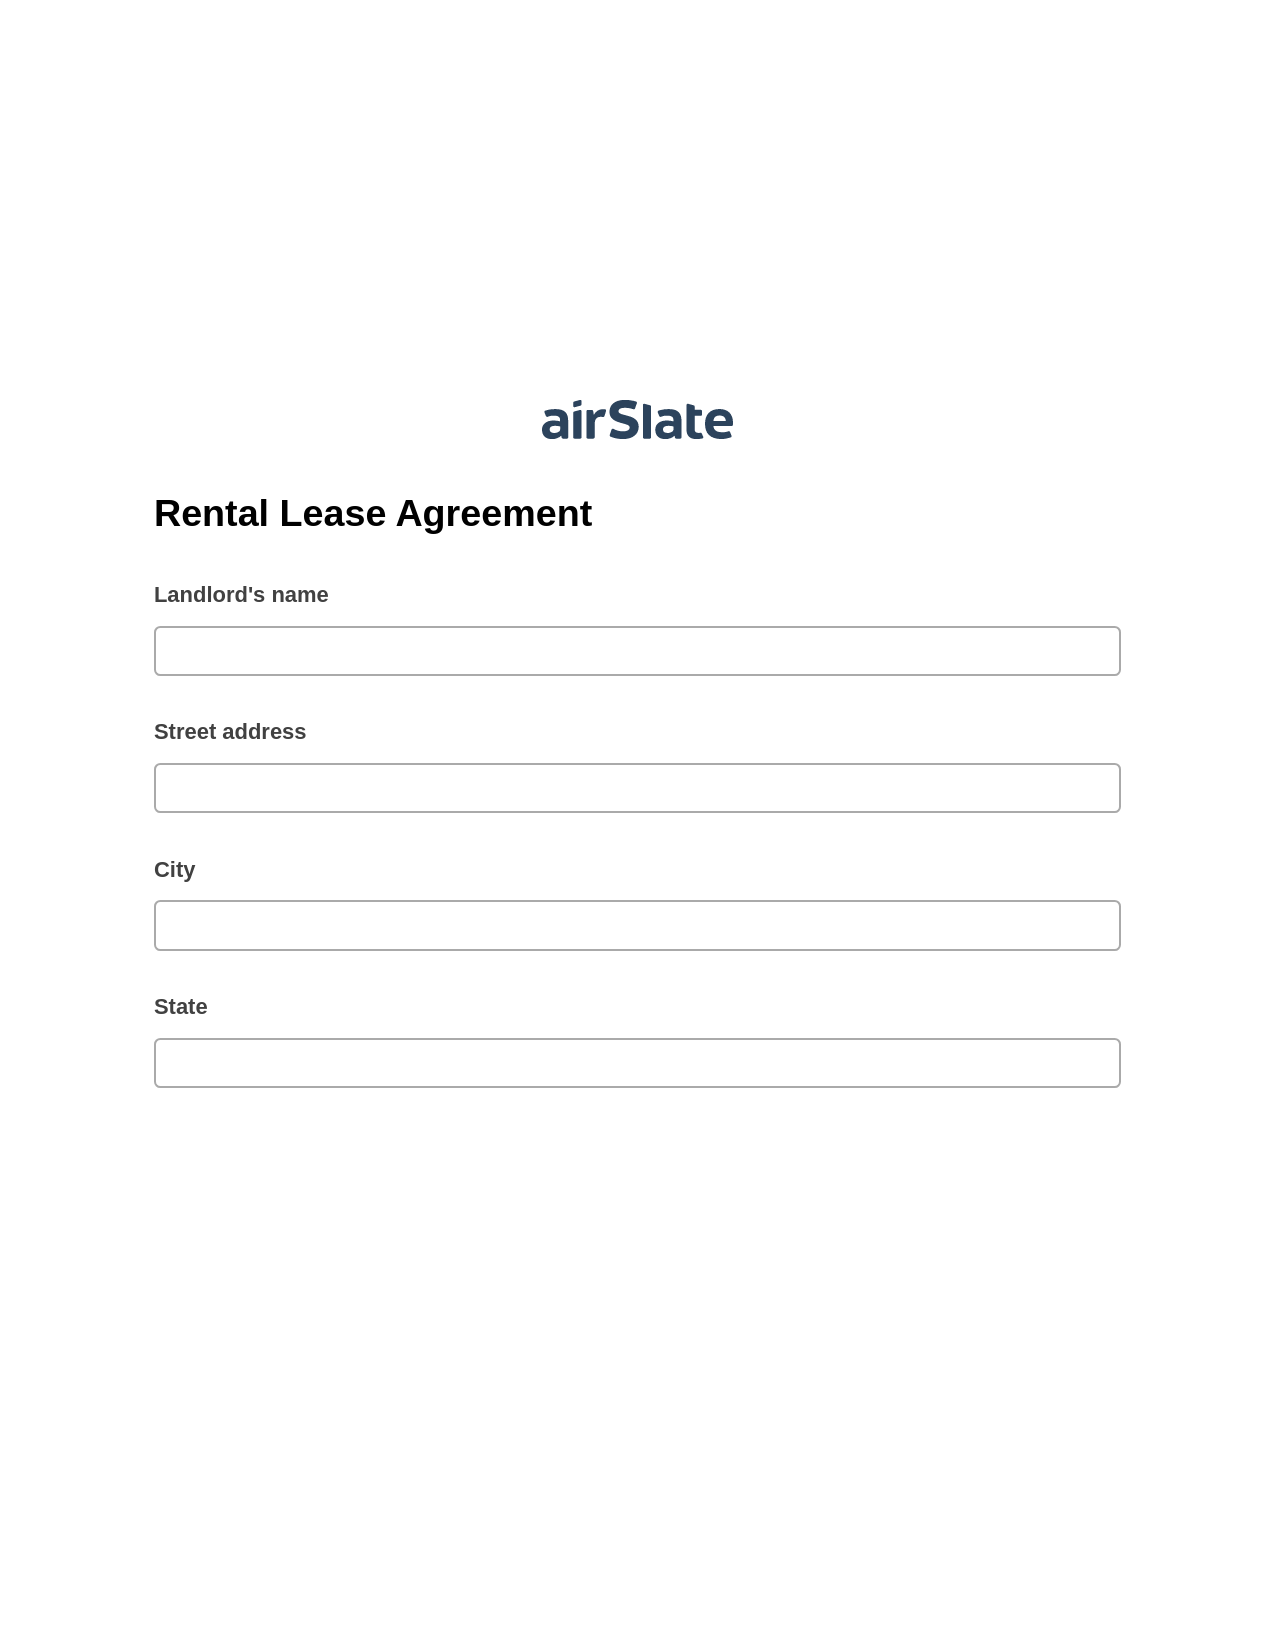 Rental Lease Agreement Pre-fill from Google Sheets Bot, System Bot - Create a Slate in another Flow, Google Drive Bot